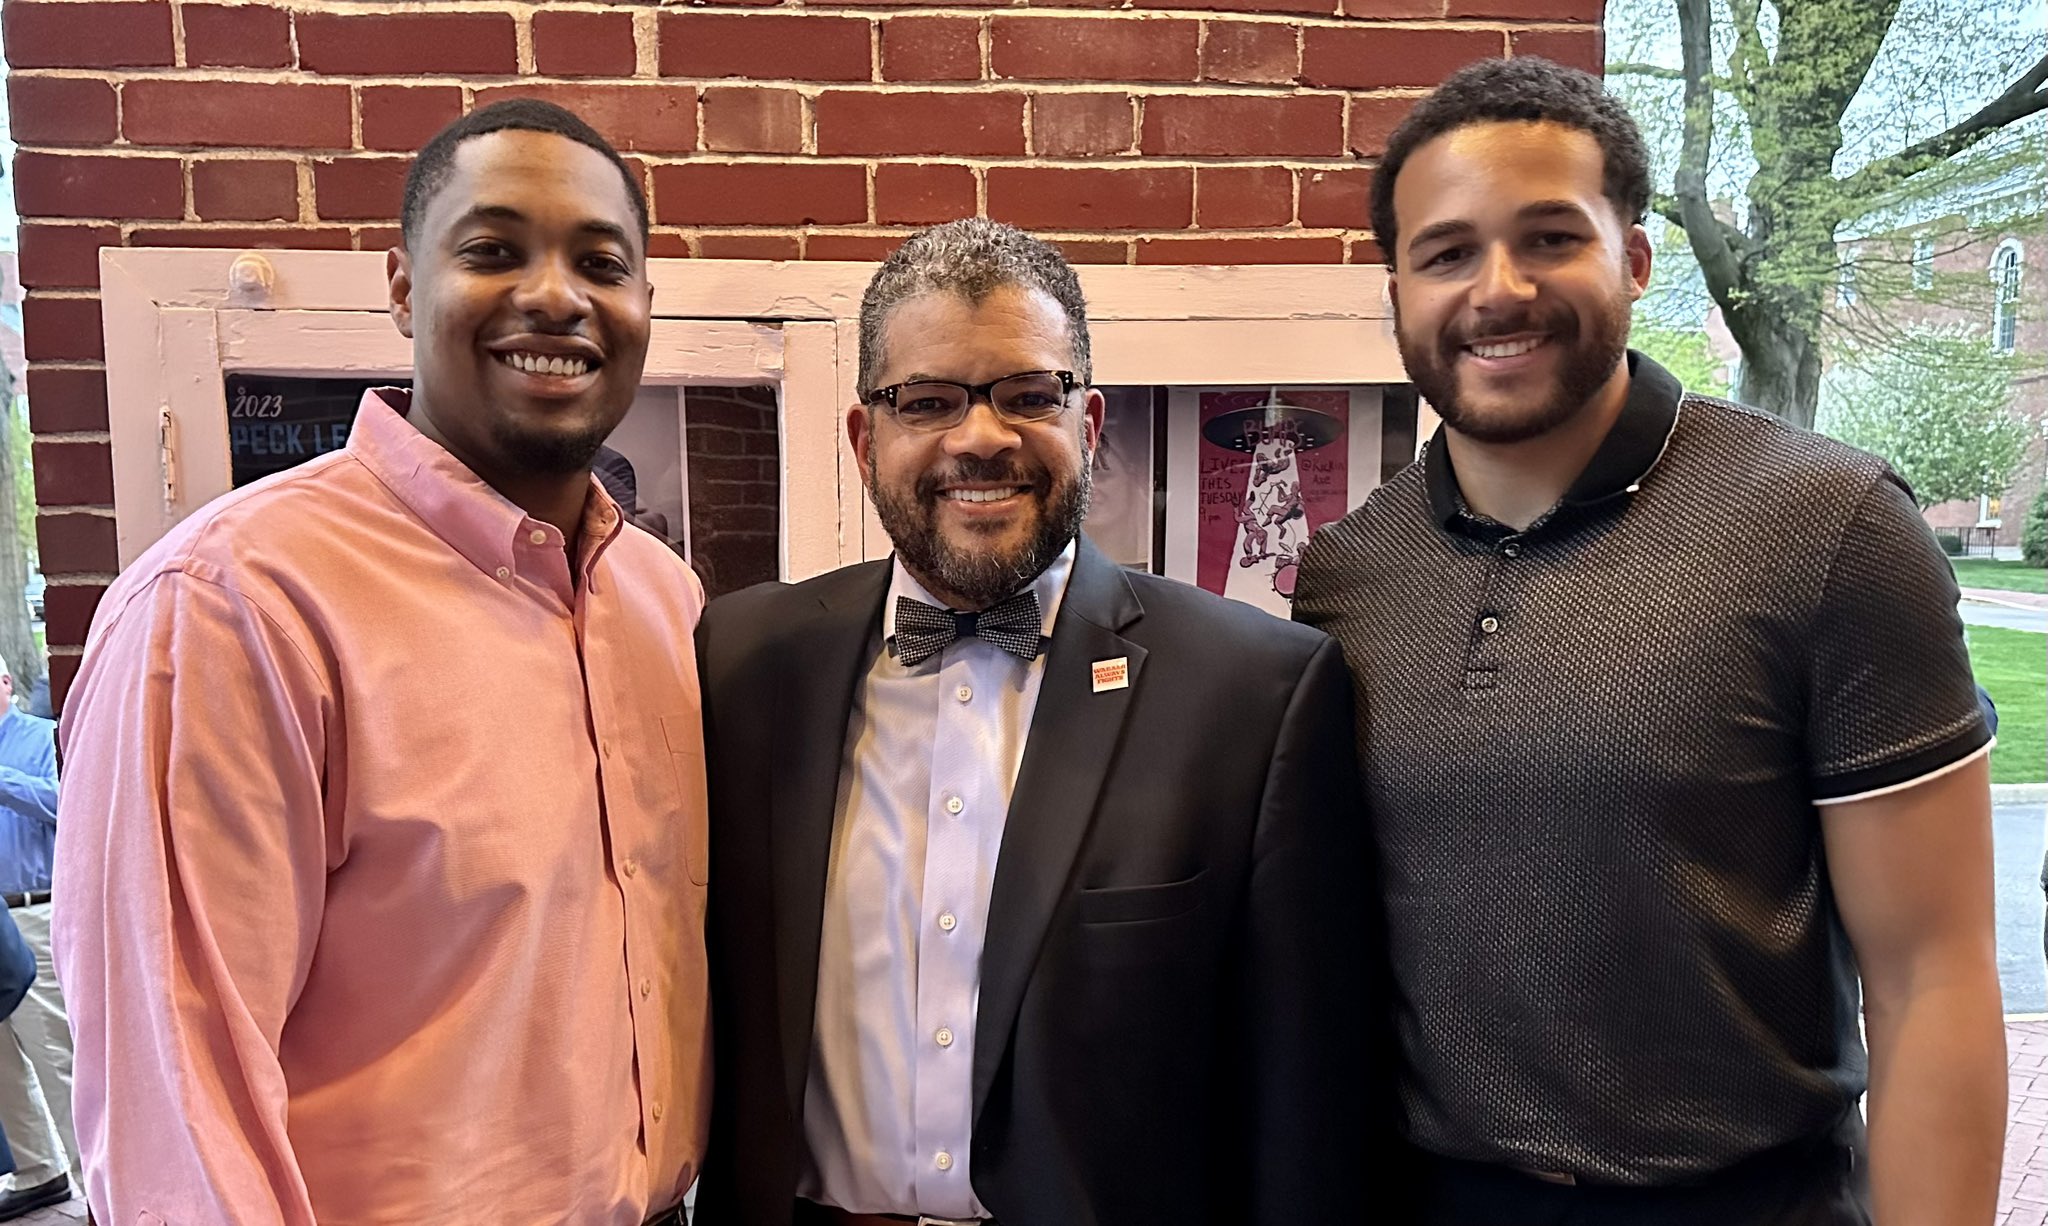 In addition to serving on the social media committee, Thomas has been involved in the MXIBS’ efforts to engage with the greater community, on events and programming that support the institute’s mission of mentoring and service. 